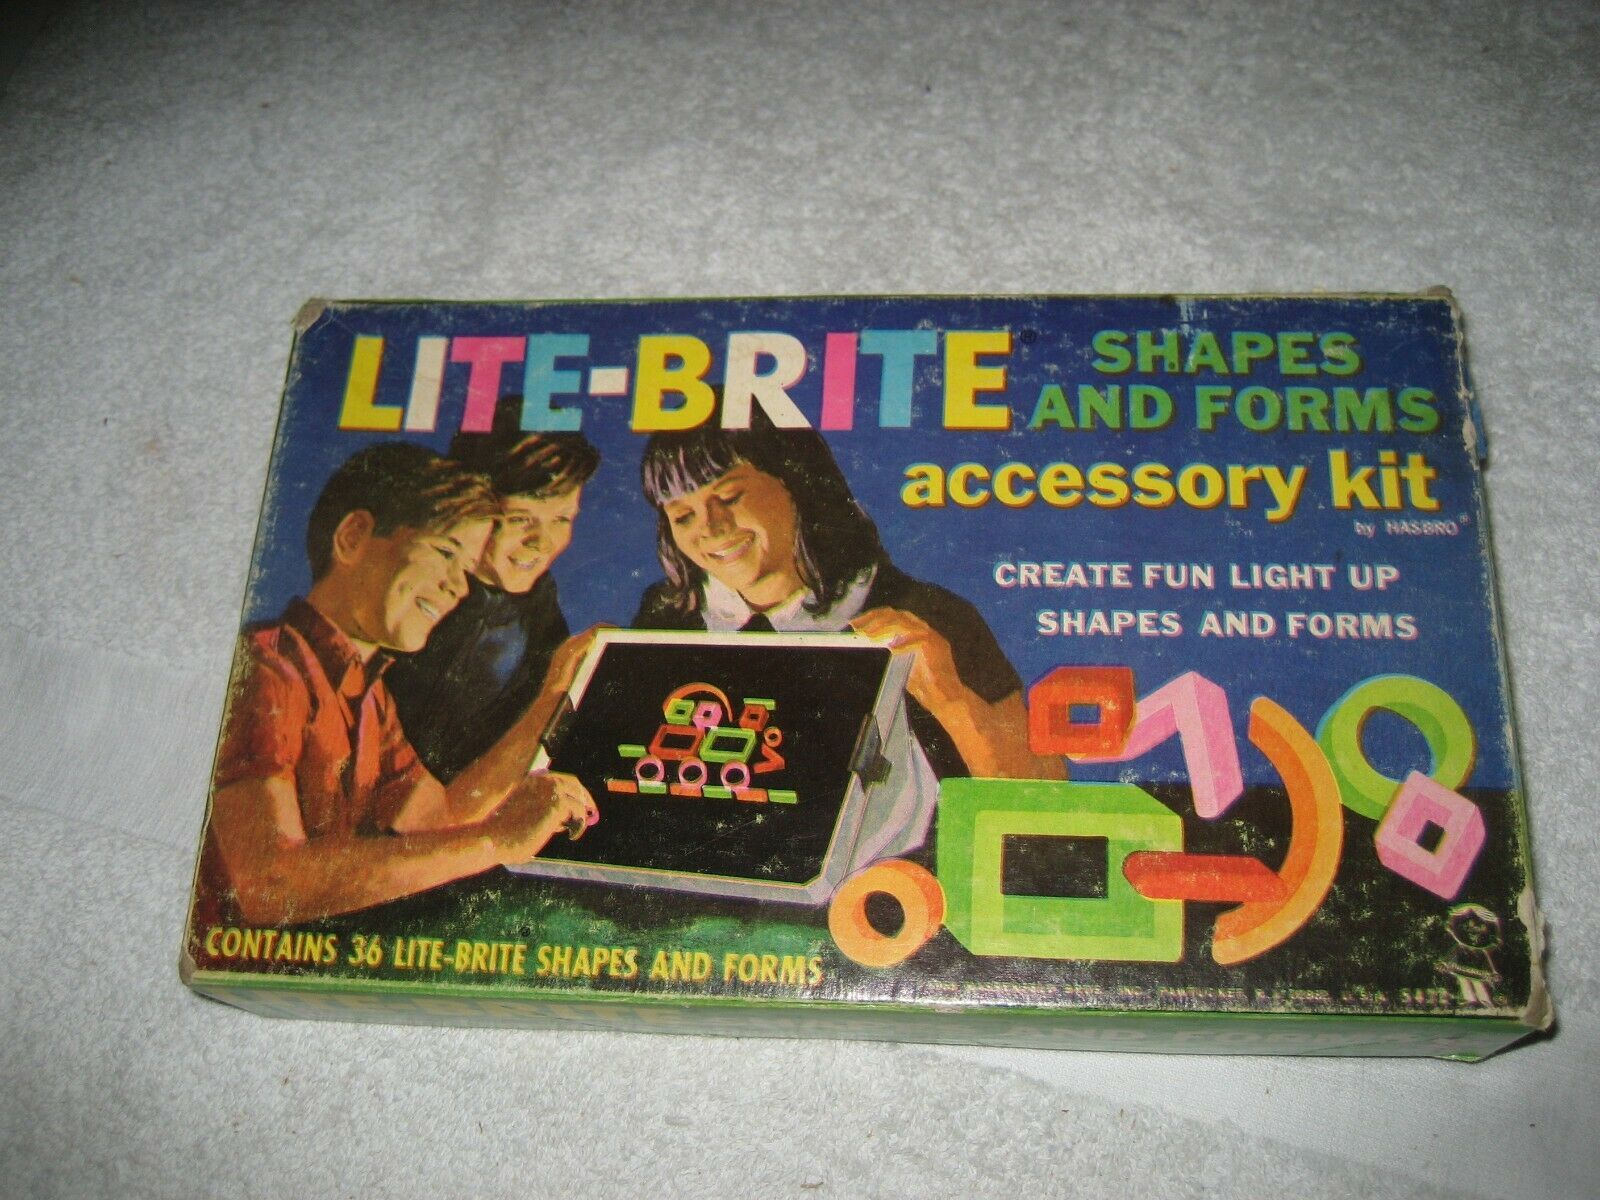  Vintage 1968 Lite Brite Bright Shapes and Forms 69 lot complete set + Extras - $34.64